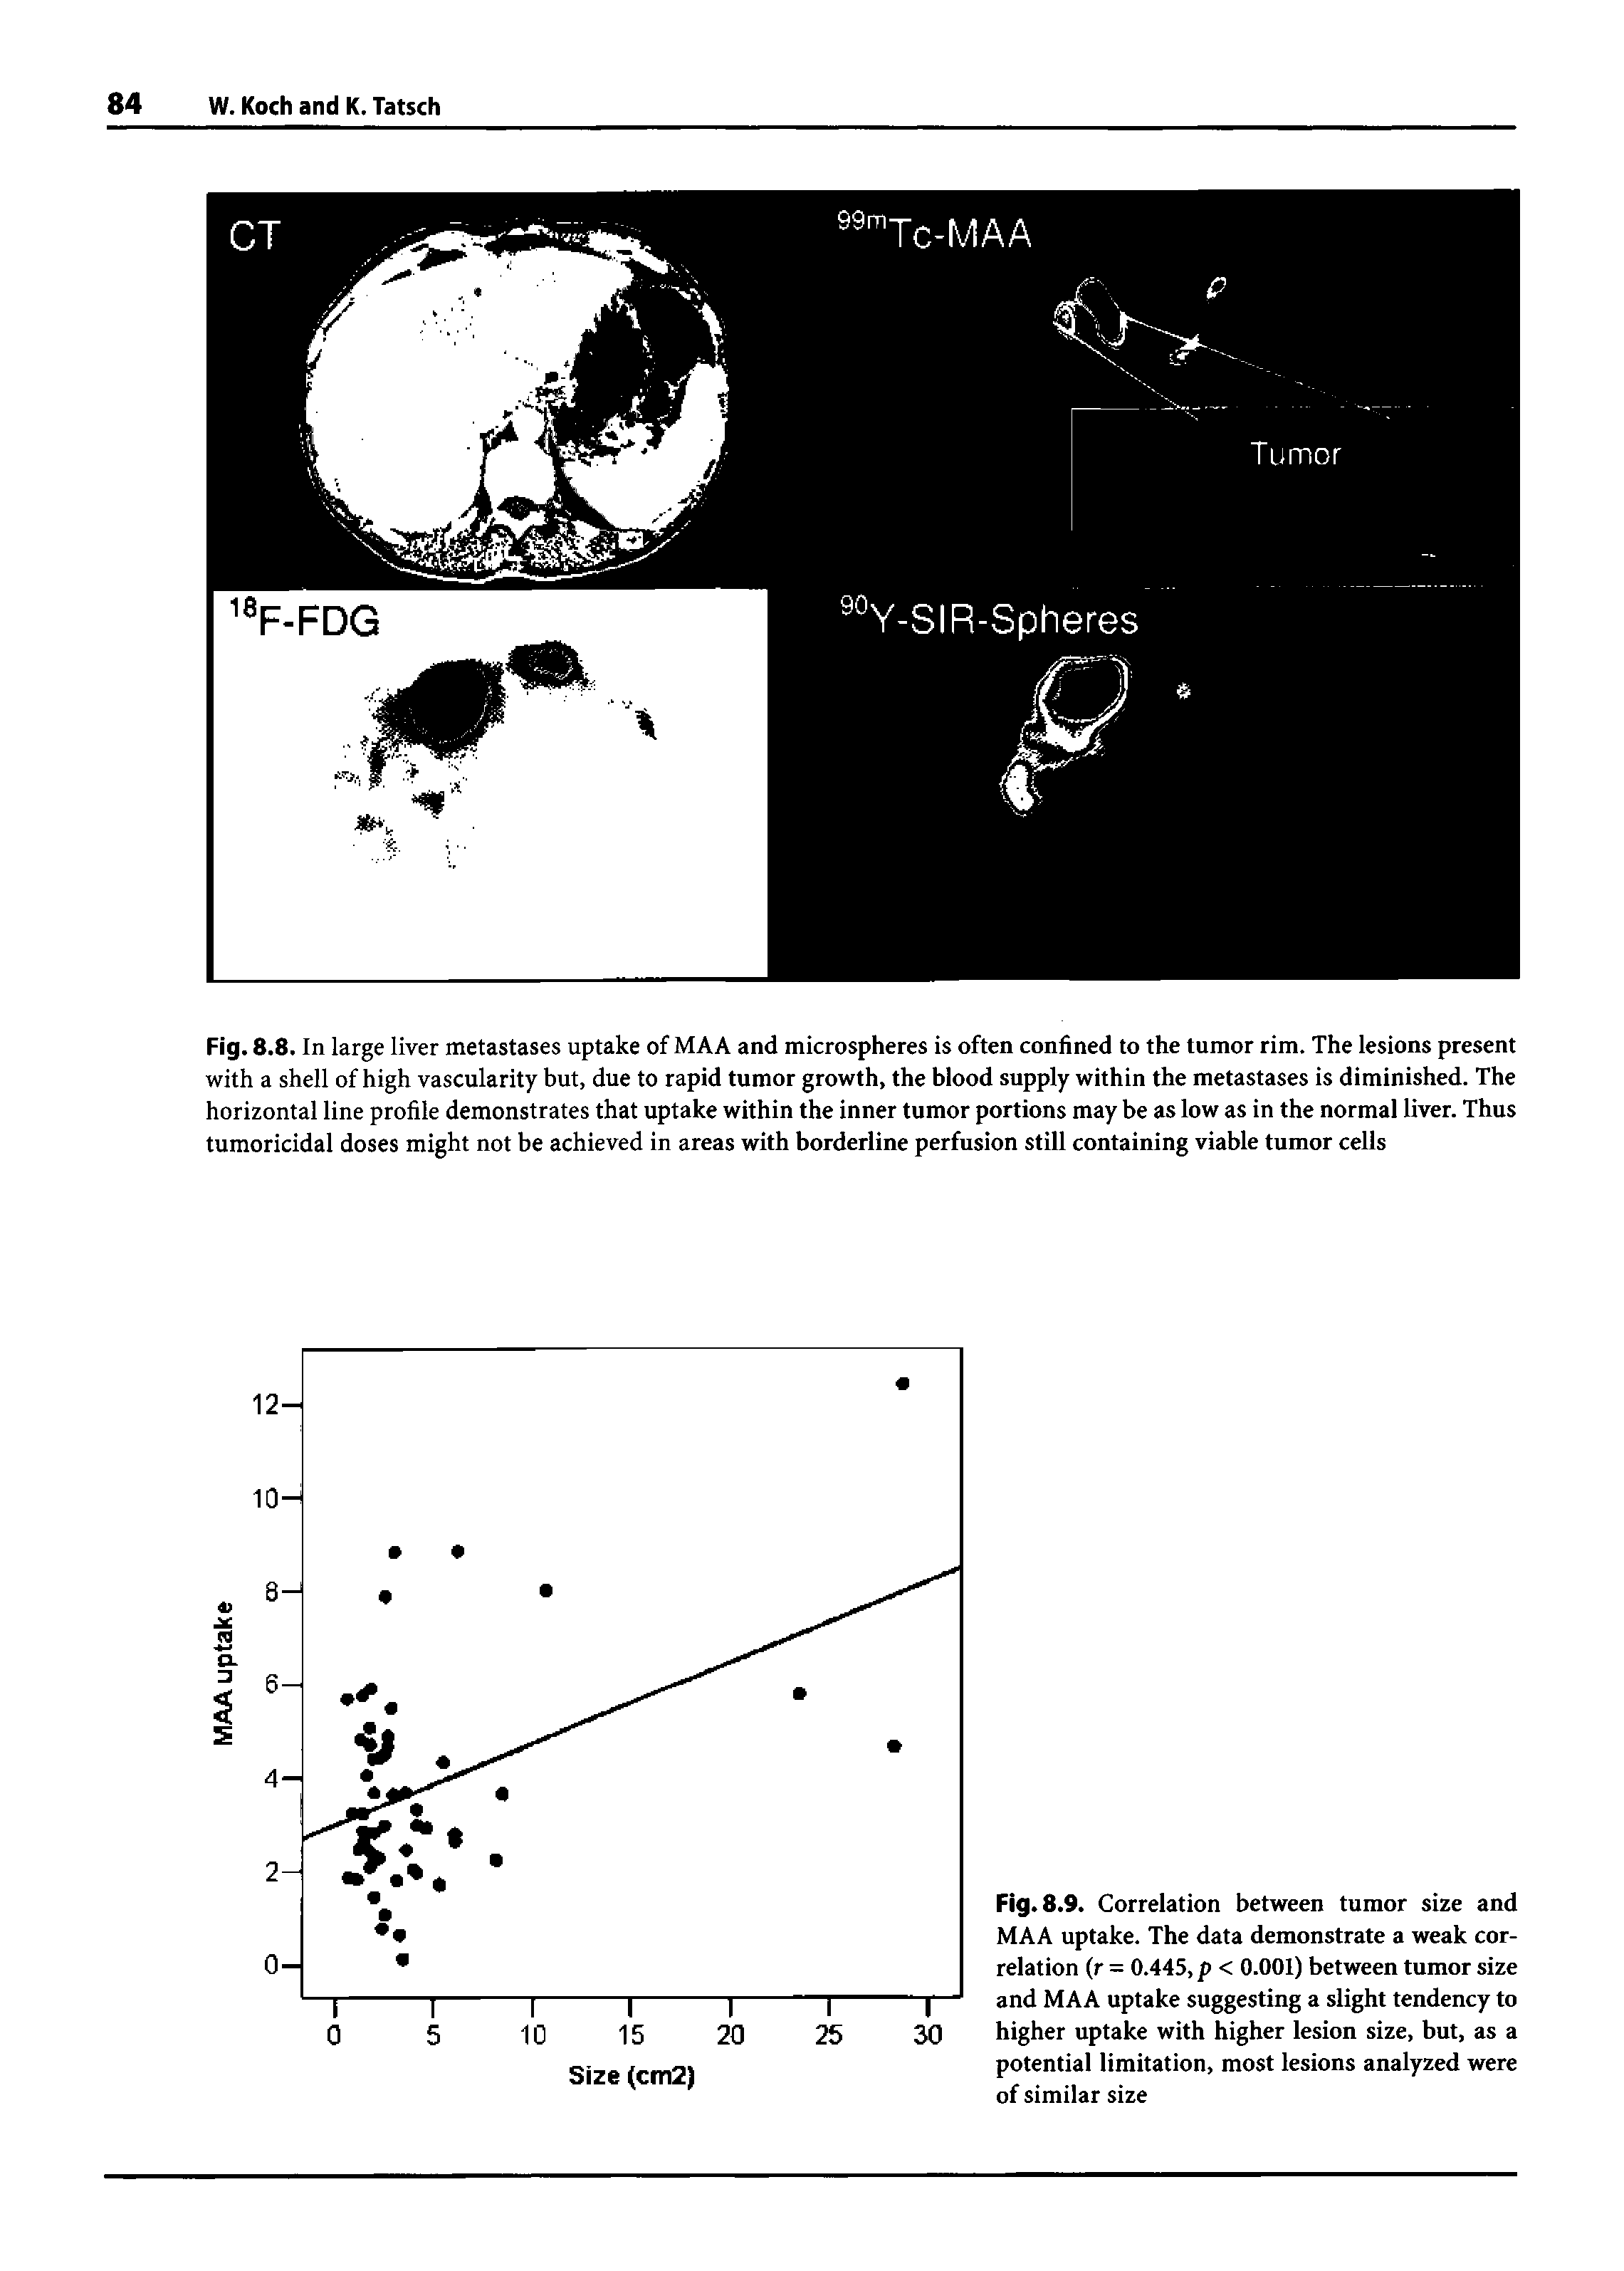 Fig. 8.8. In large liver metastases uptake of MAA and microspheres is often confined to the tumor rim. The lesions present with a shell of high vascularity but, due to rapid tumor growth, the blood supply within the metastases is diminished. The horizontal line profile demonstrates that uptake within the inner tumor portions may be as low as in the normal liver. Thus tumoricidal doses might not be achieved in areas with borderline perfusion still containing viable tumor cells...